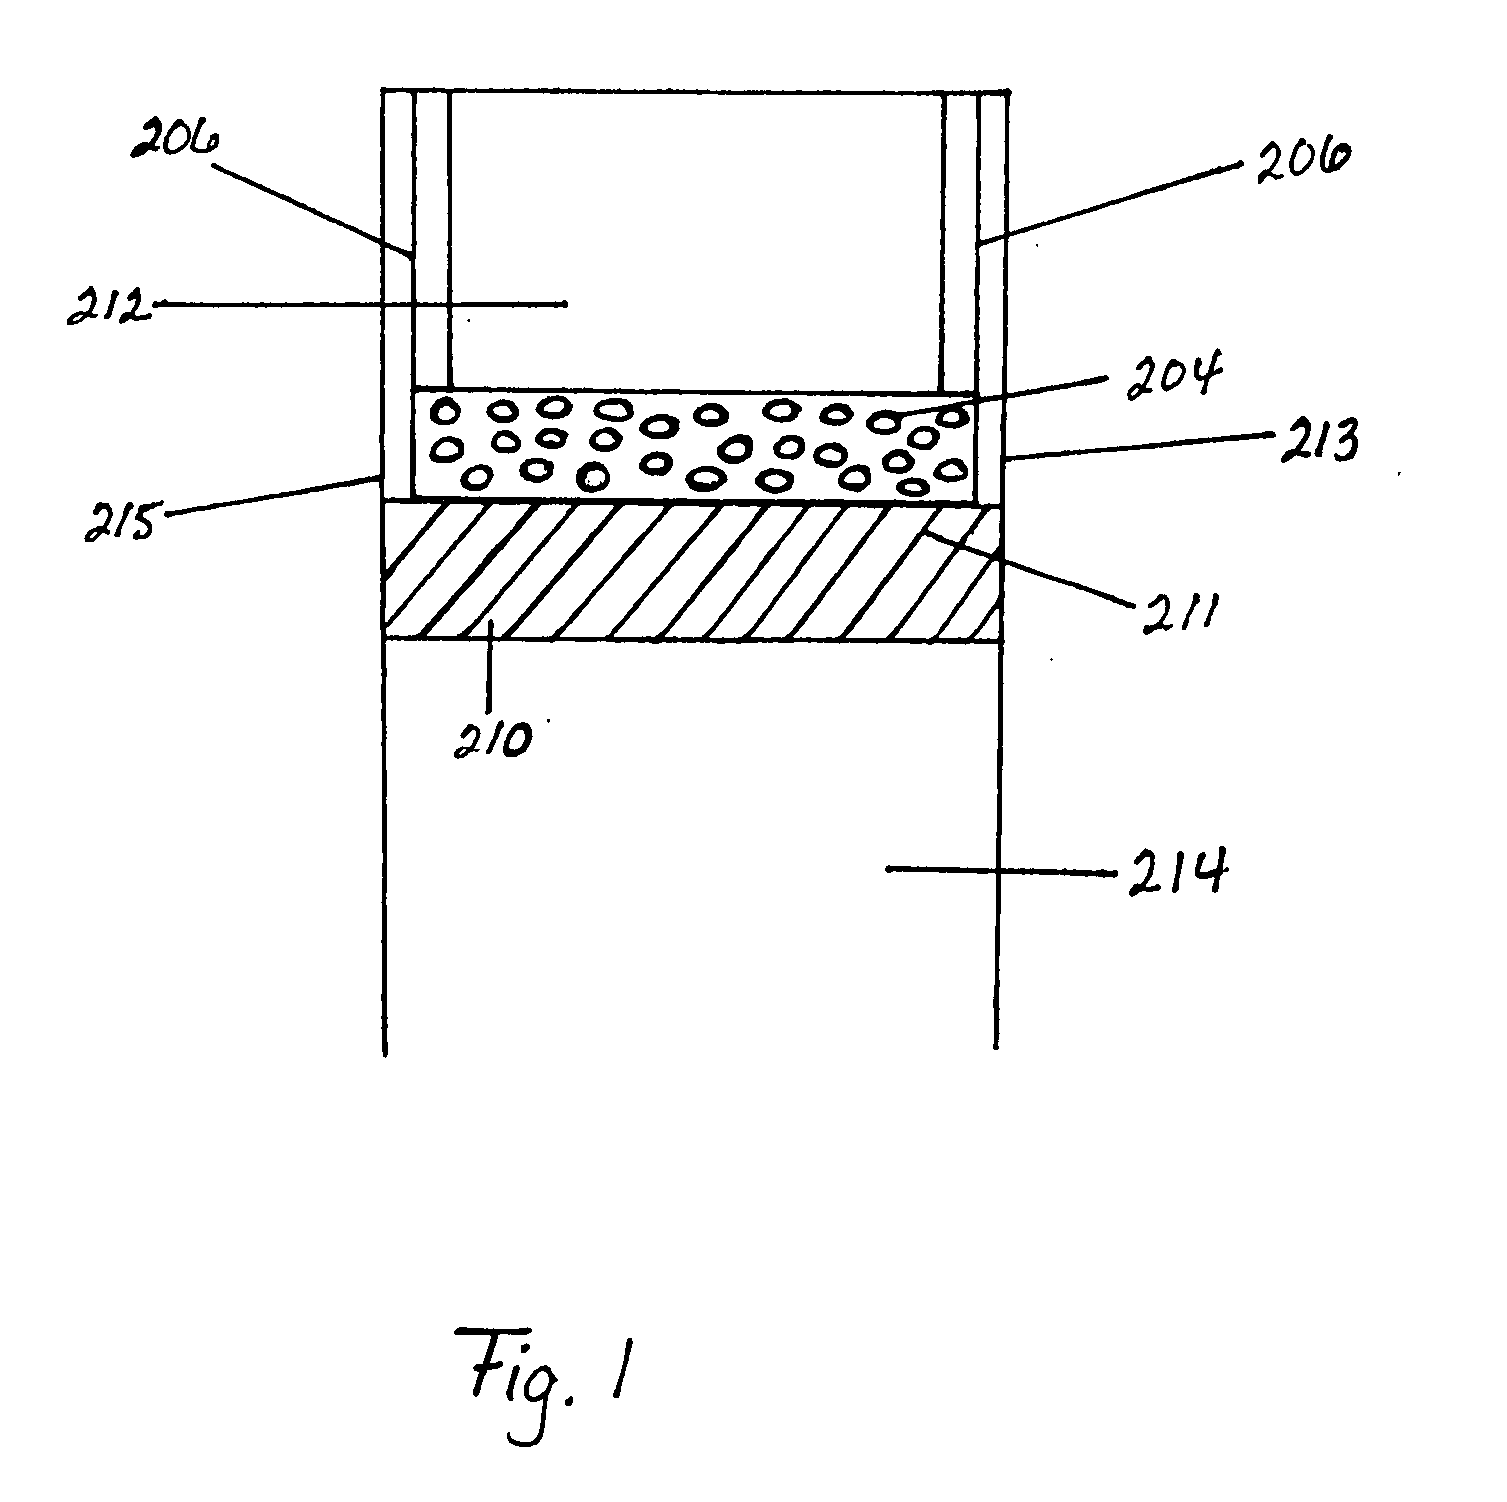 Integrated combustion reactors and methods of conducting simultaneous endothermic and exothermic reactions